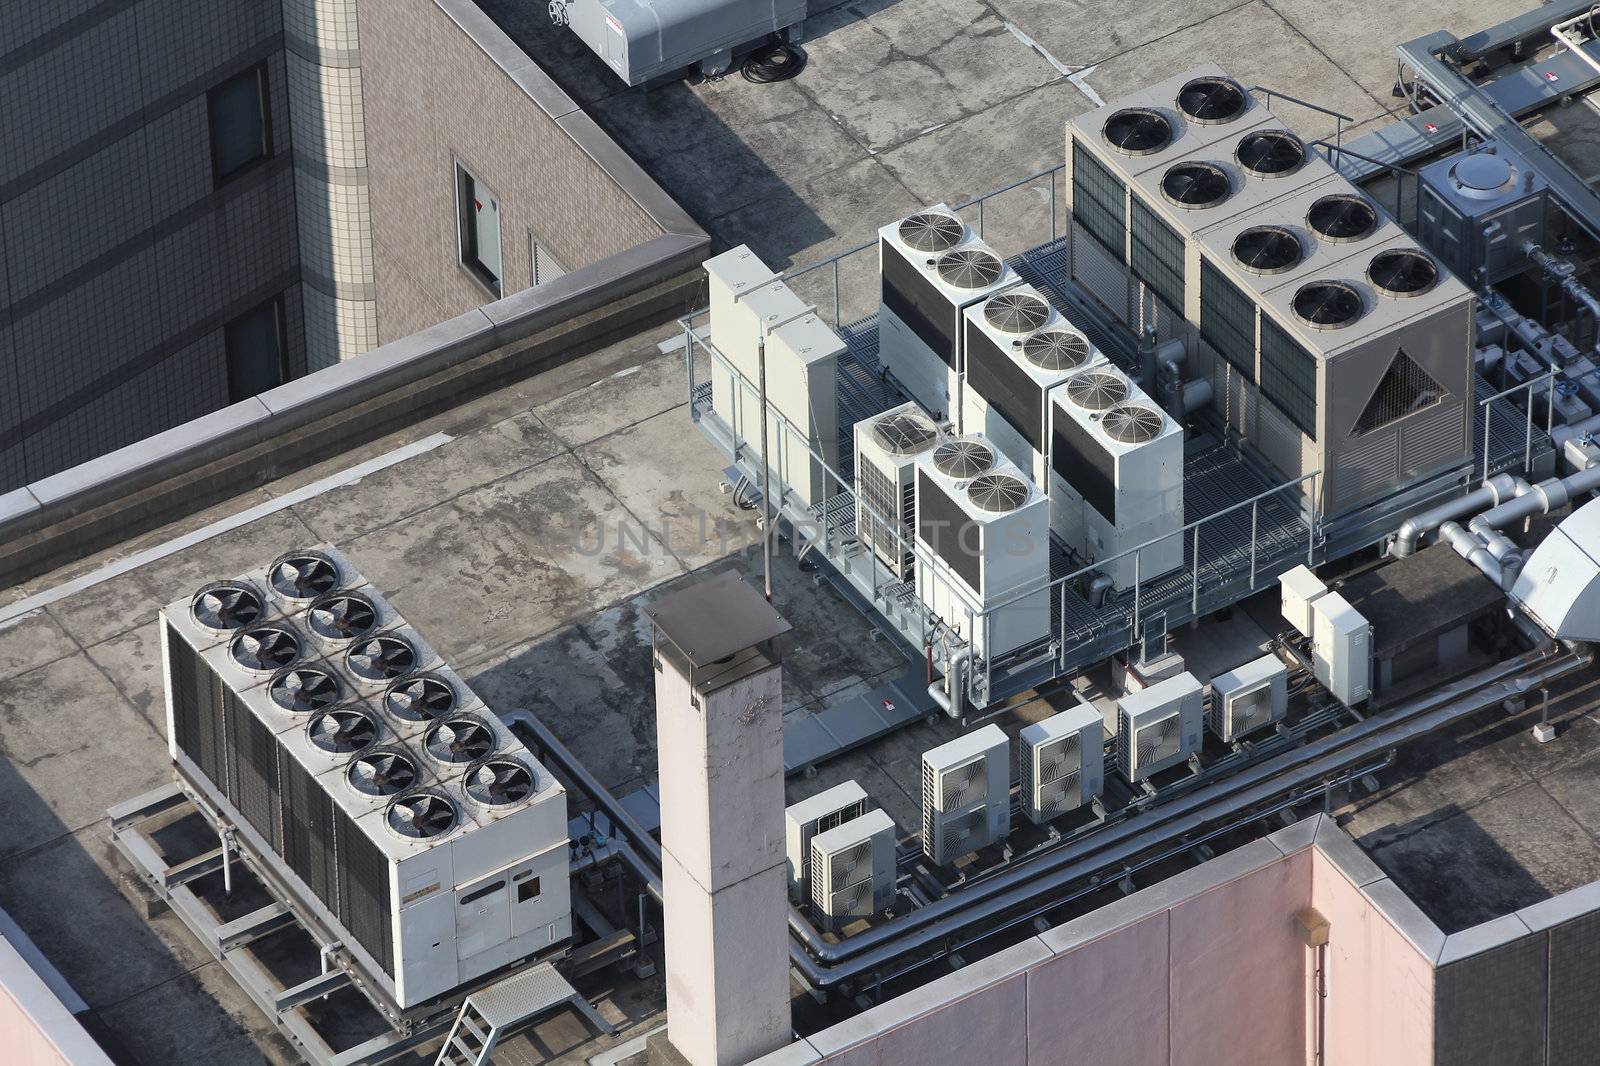 Exhaust vents of industrial air conditioning and ventilation units. Skyscraper roof top in Tokyo, Japan.